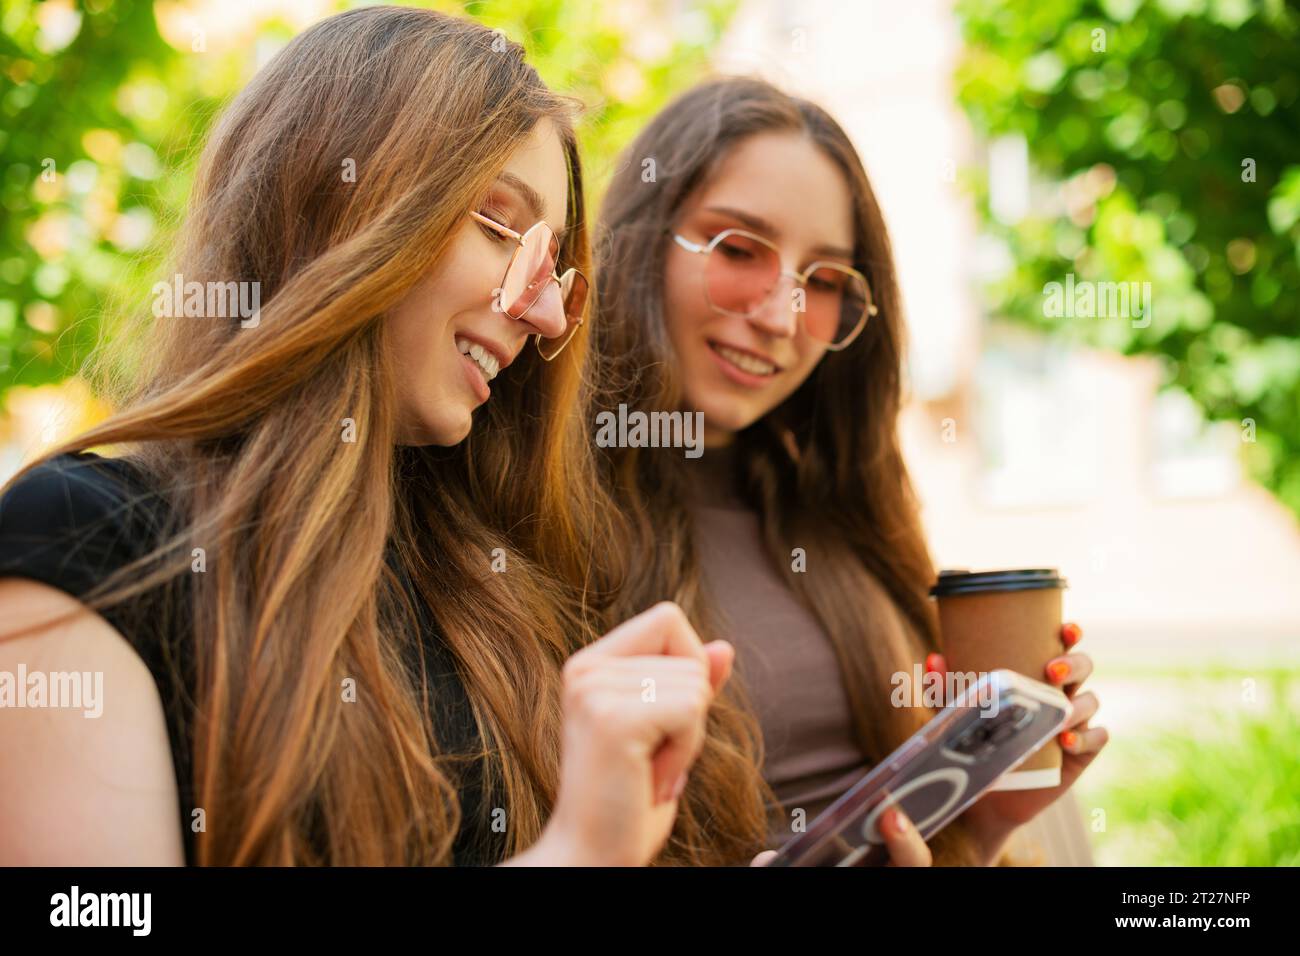 Amazed Twins sisters with sunglasses using Social media with a Smart Phone sitting on a bench in town a holding disposable paper coffee cup outdoors Stock Photo